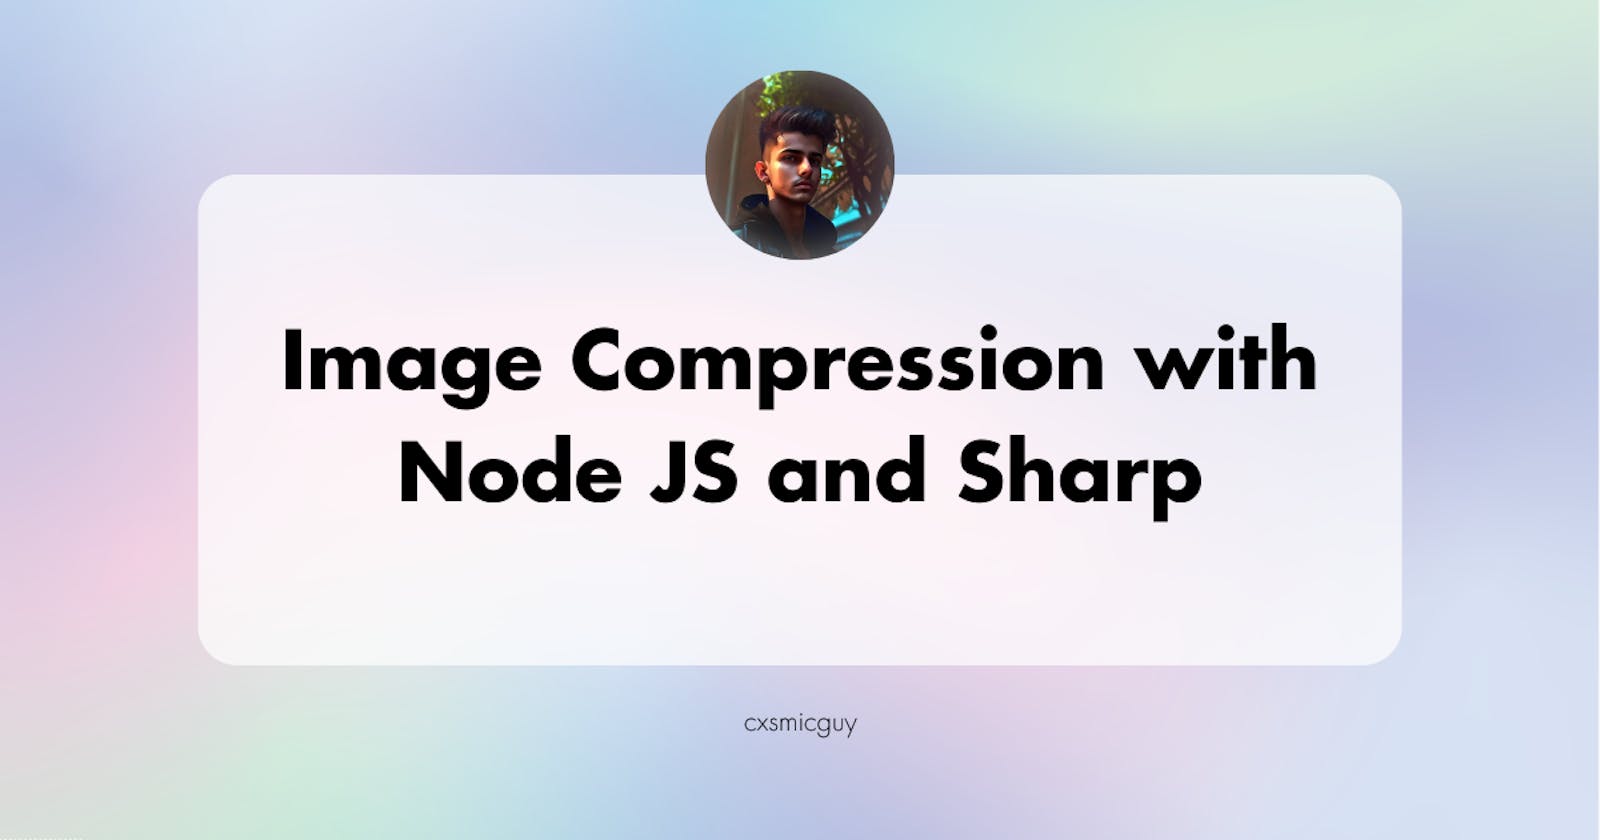 Image Compression with Node.js and Sharp